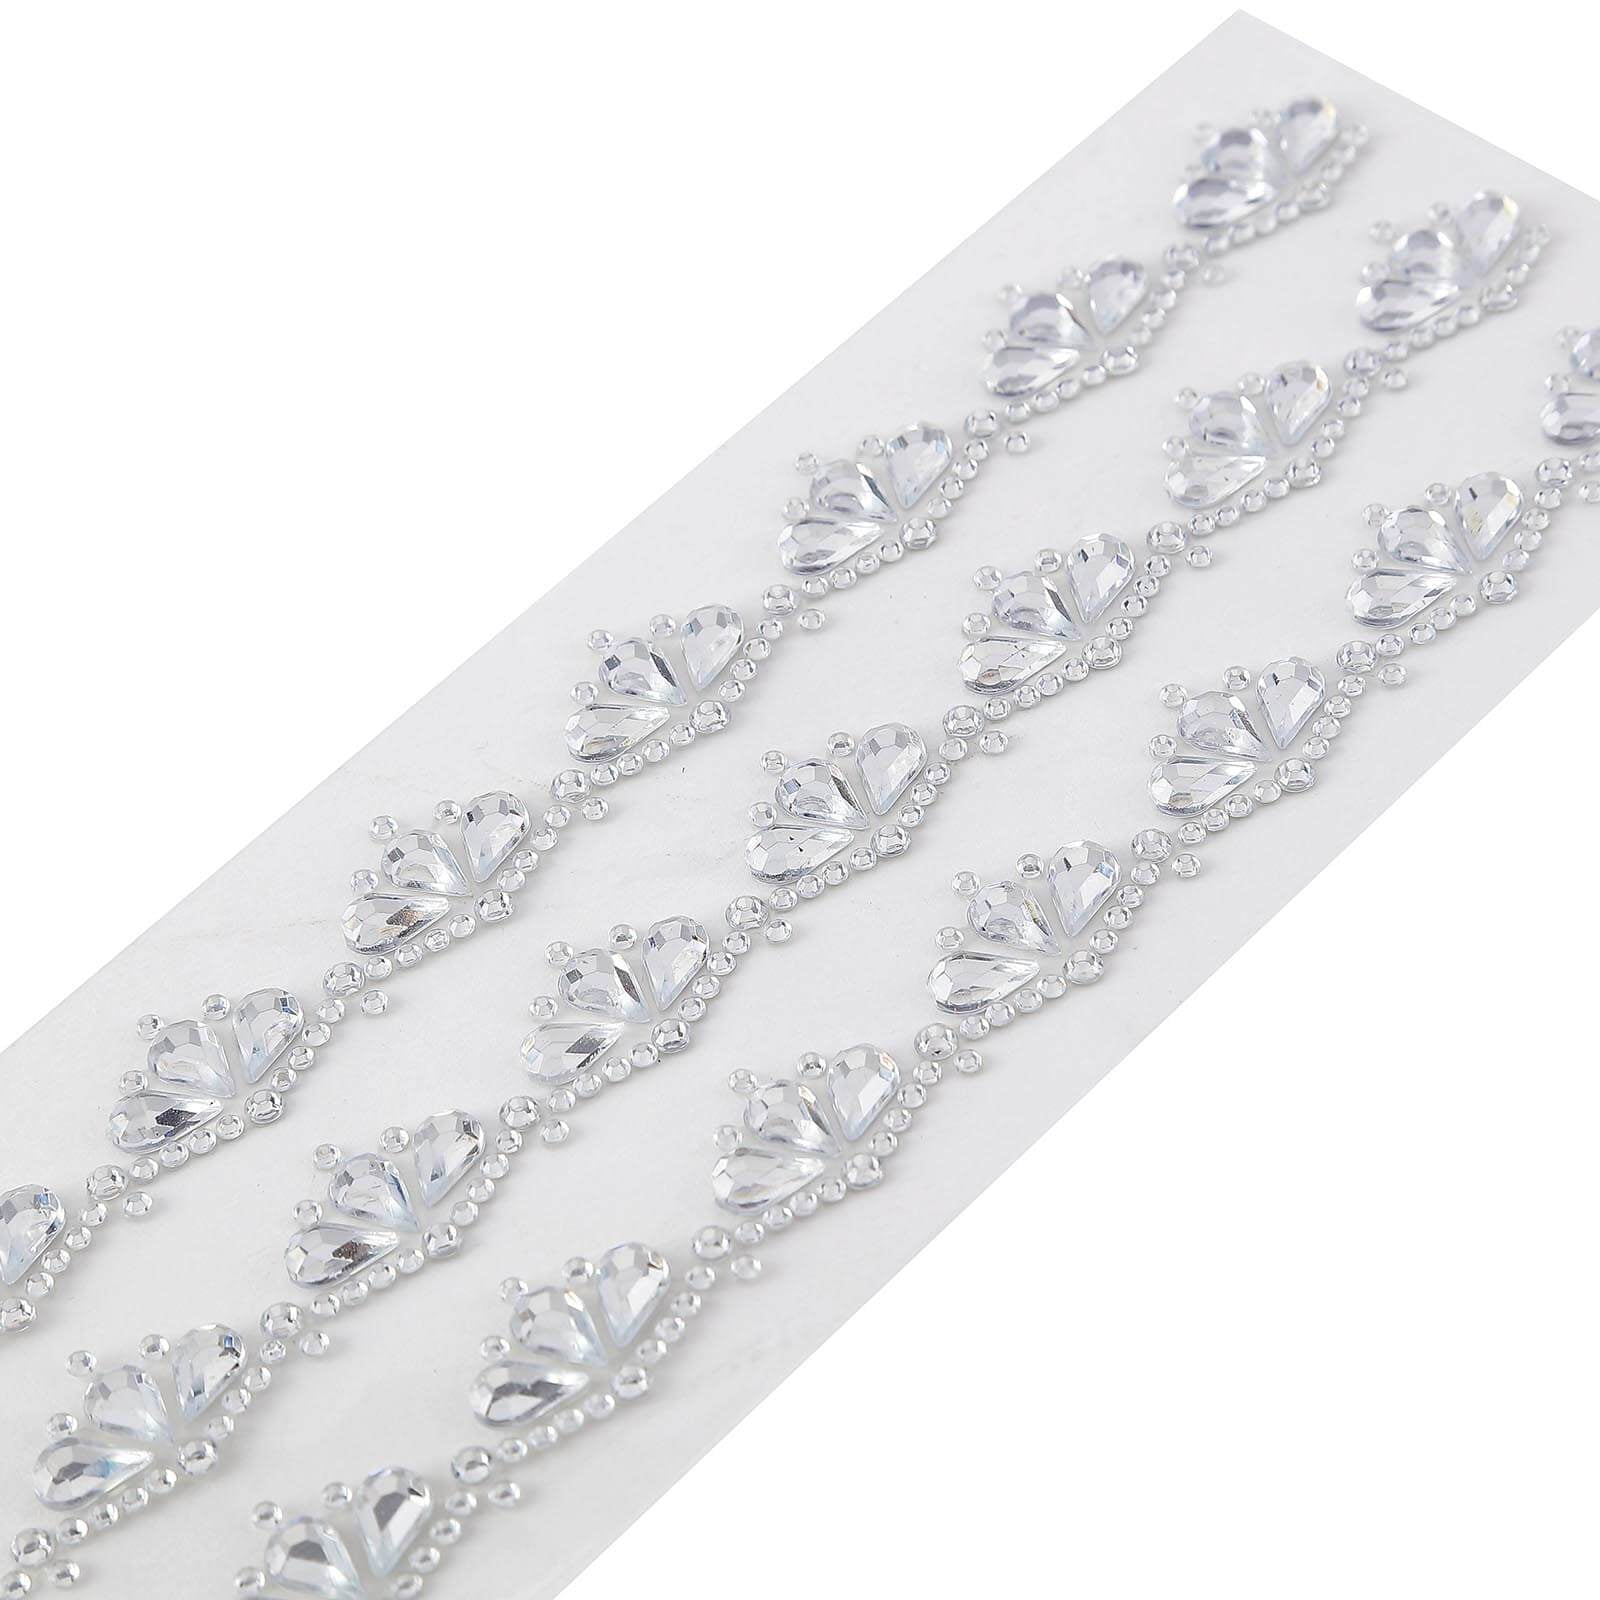 2 strips 6" long Floral Pearl Diamond Self-Adhesive Stickers Crafts Decorations 